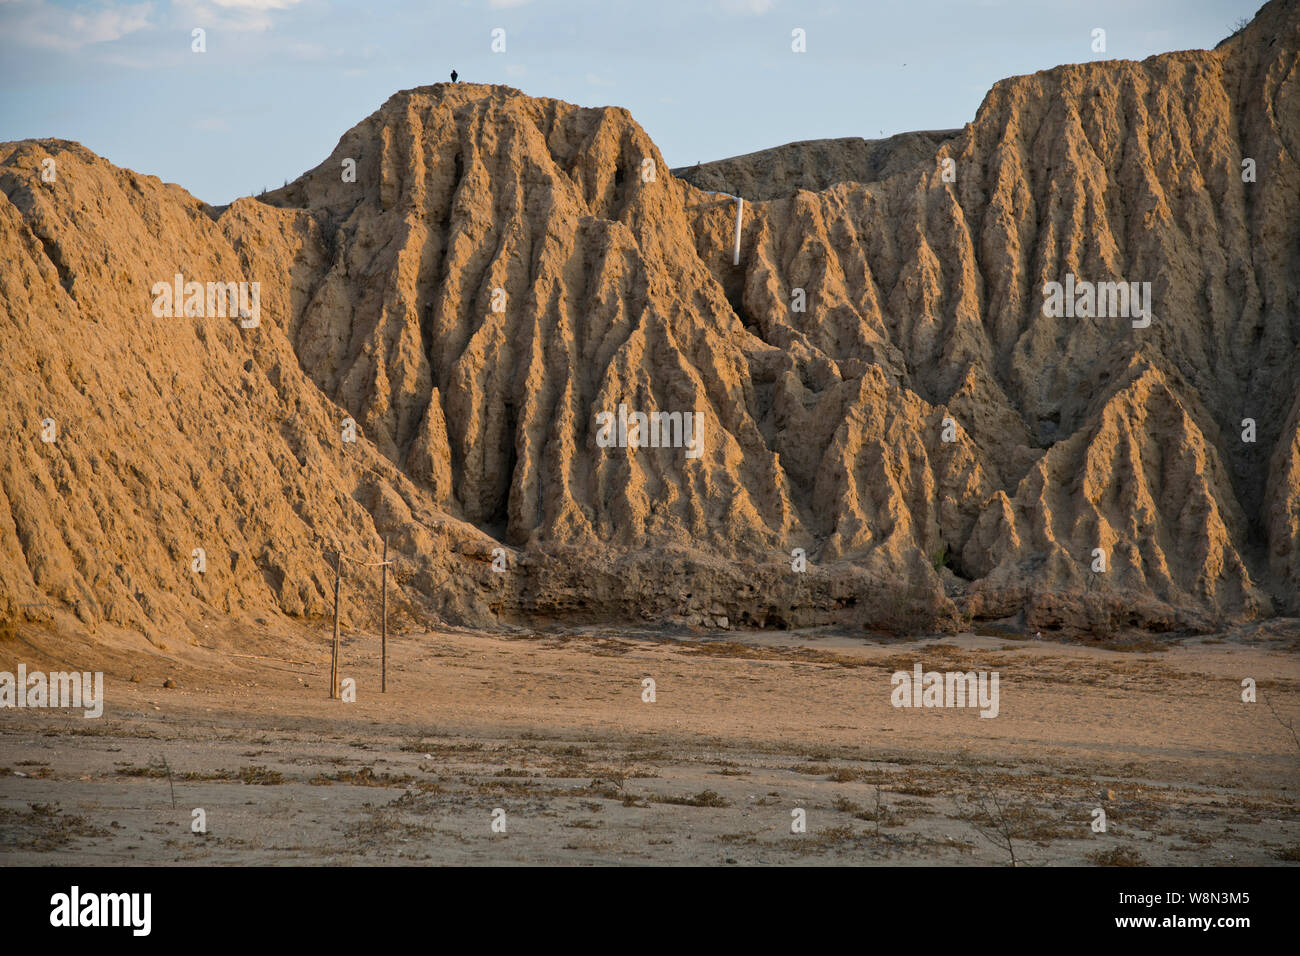 Burial Mounds,Treasures,Tombs,Pyramids,Erosion over Time,Moche Noblemen,Los Horcones de Tucume,Tecume,Northern Peru,Peru,South America Stock Photo